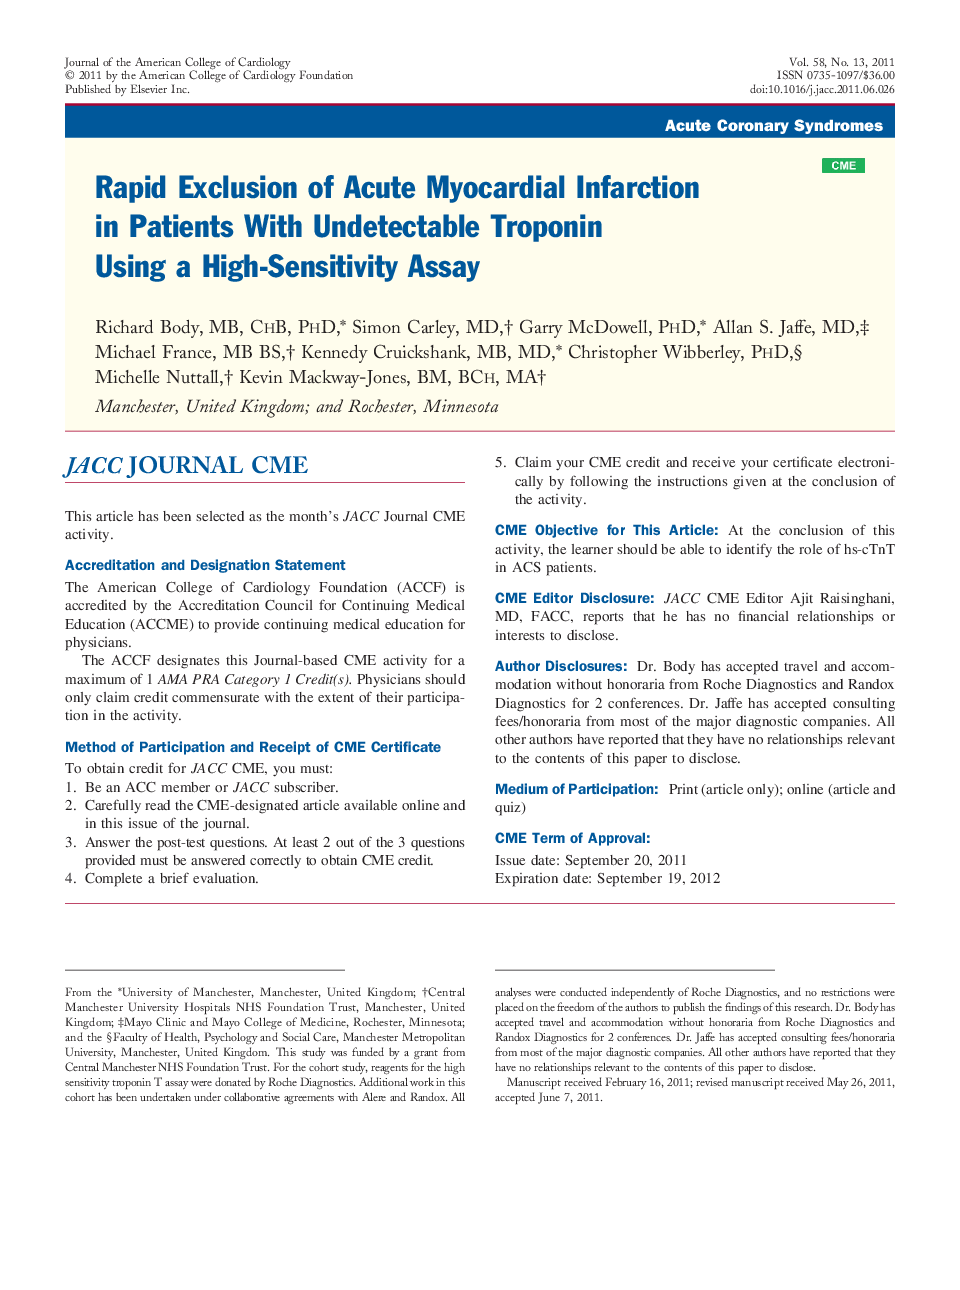 Rapid Exclusion of Acute Myocardial Infarction in Patients With Undetectable Troponin Using a High-Sensitivity Assay 